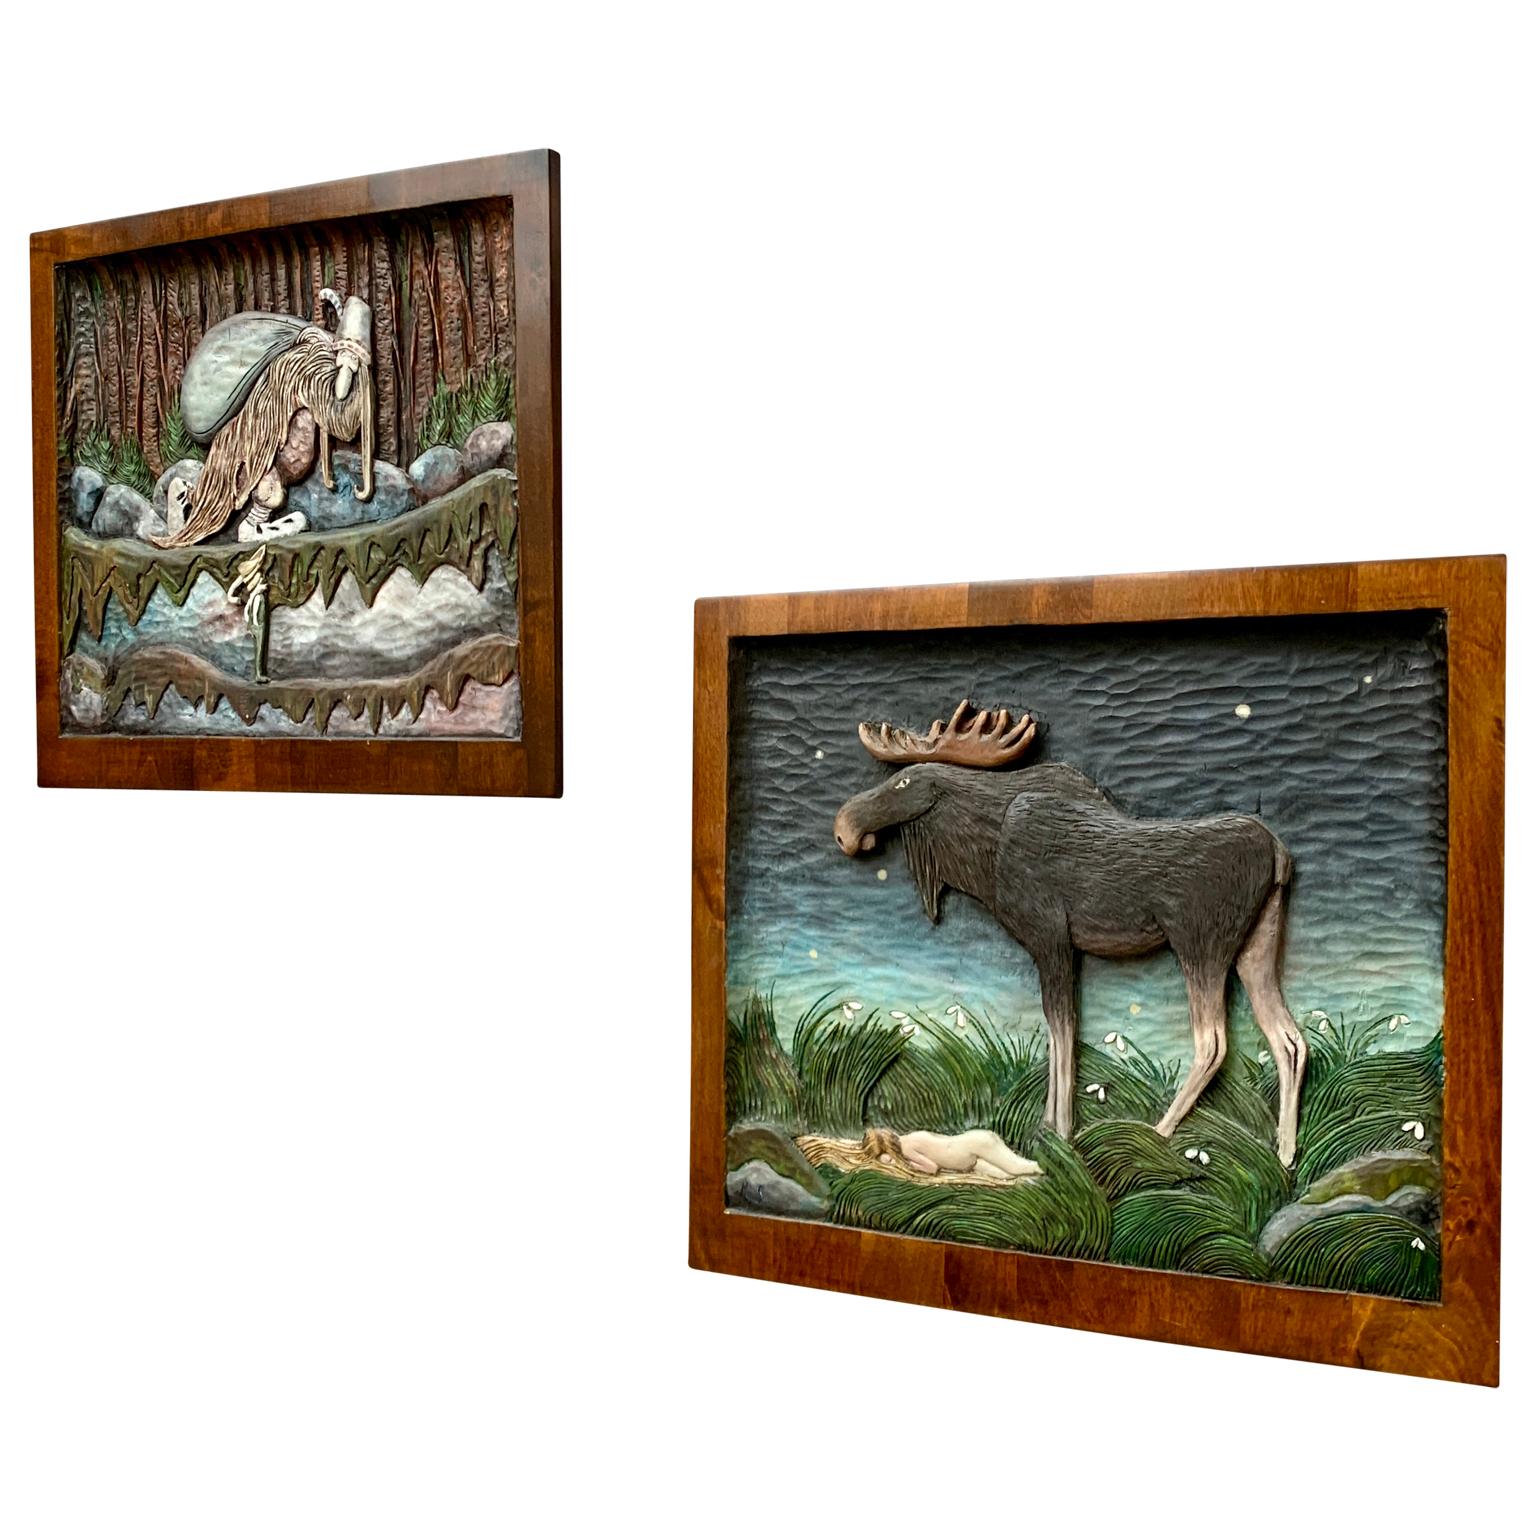 A pair of wooden carved and hand painted birch wood panels representing a moose and a troll with a child. These figures were taken from the famous Swedish painter and illustrator John Bauer (1882-1918) work 